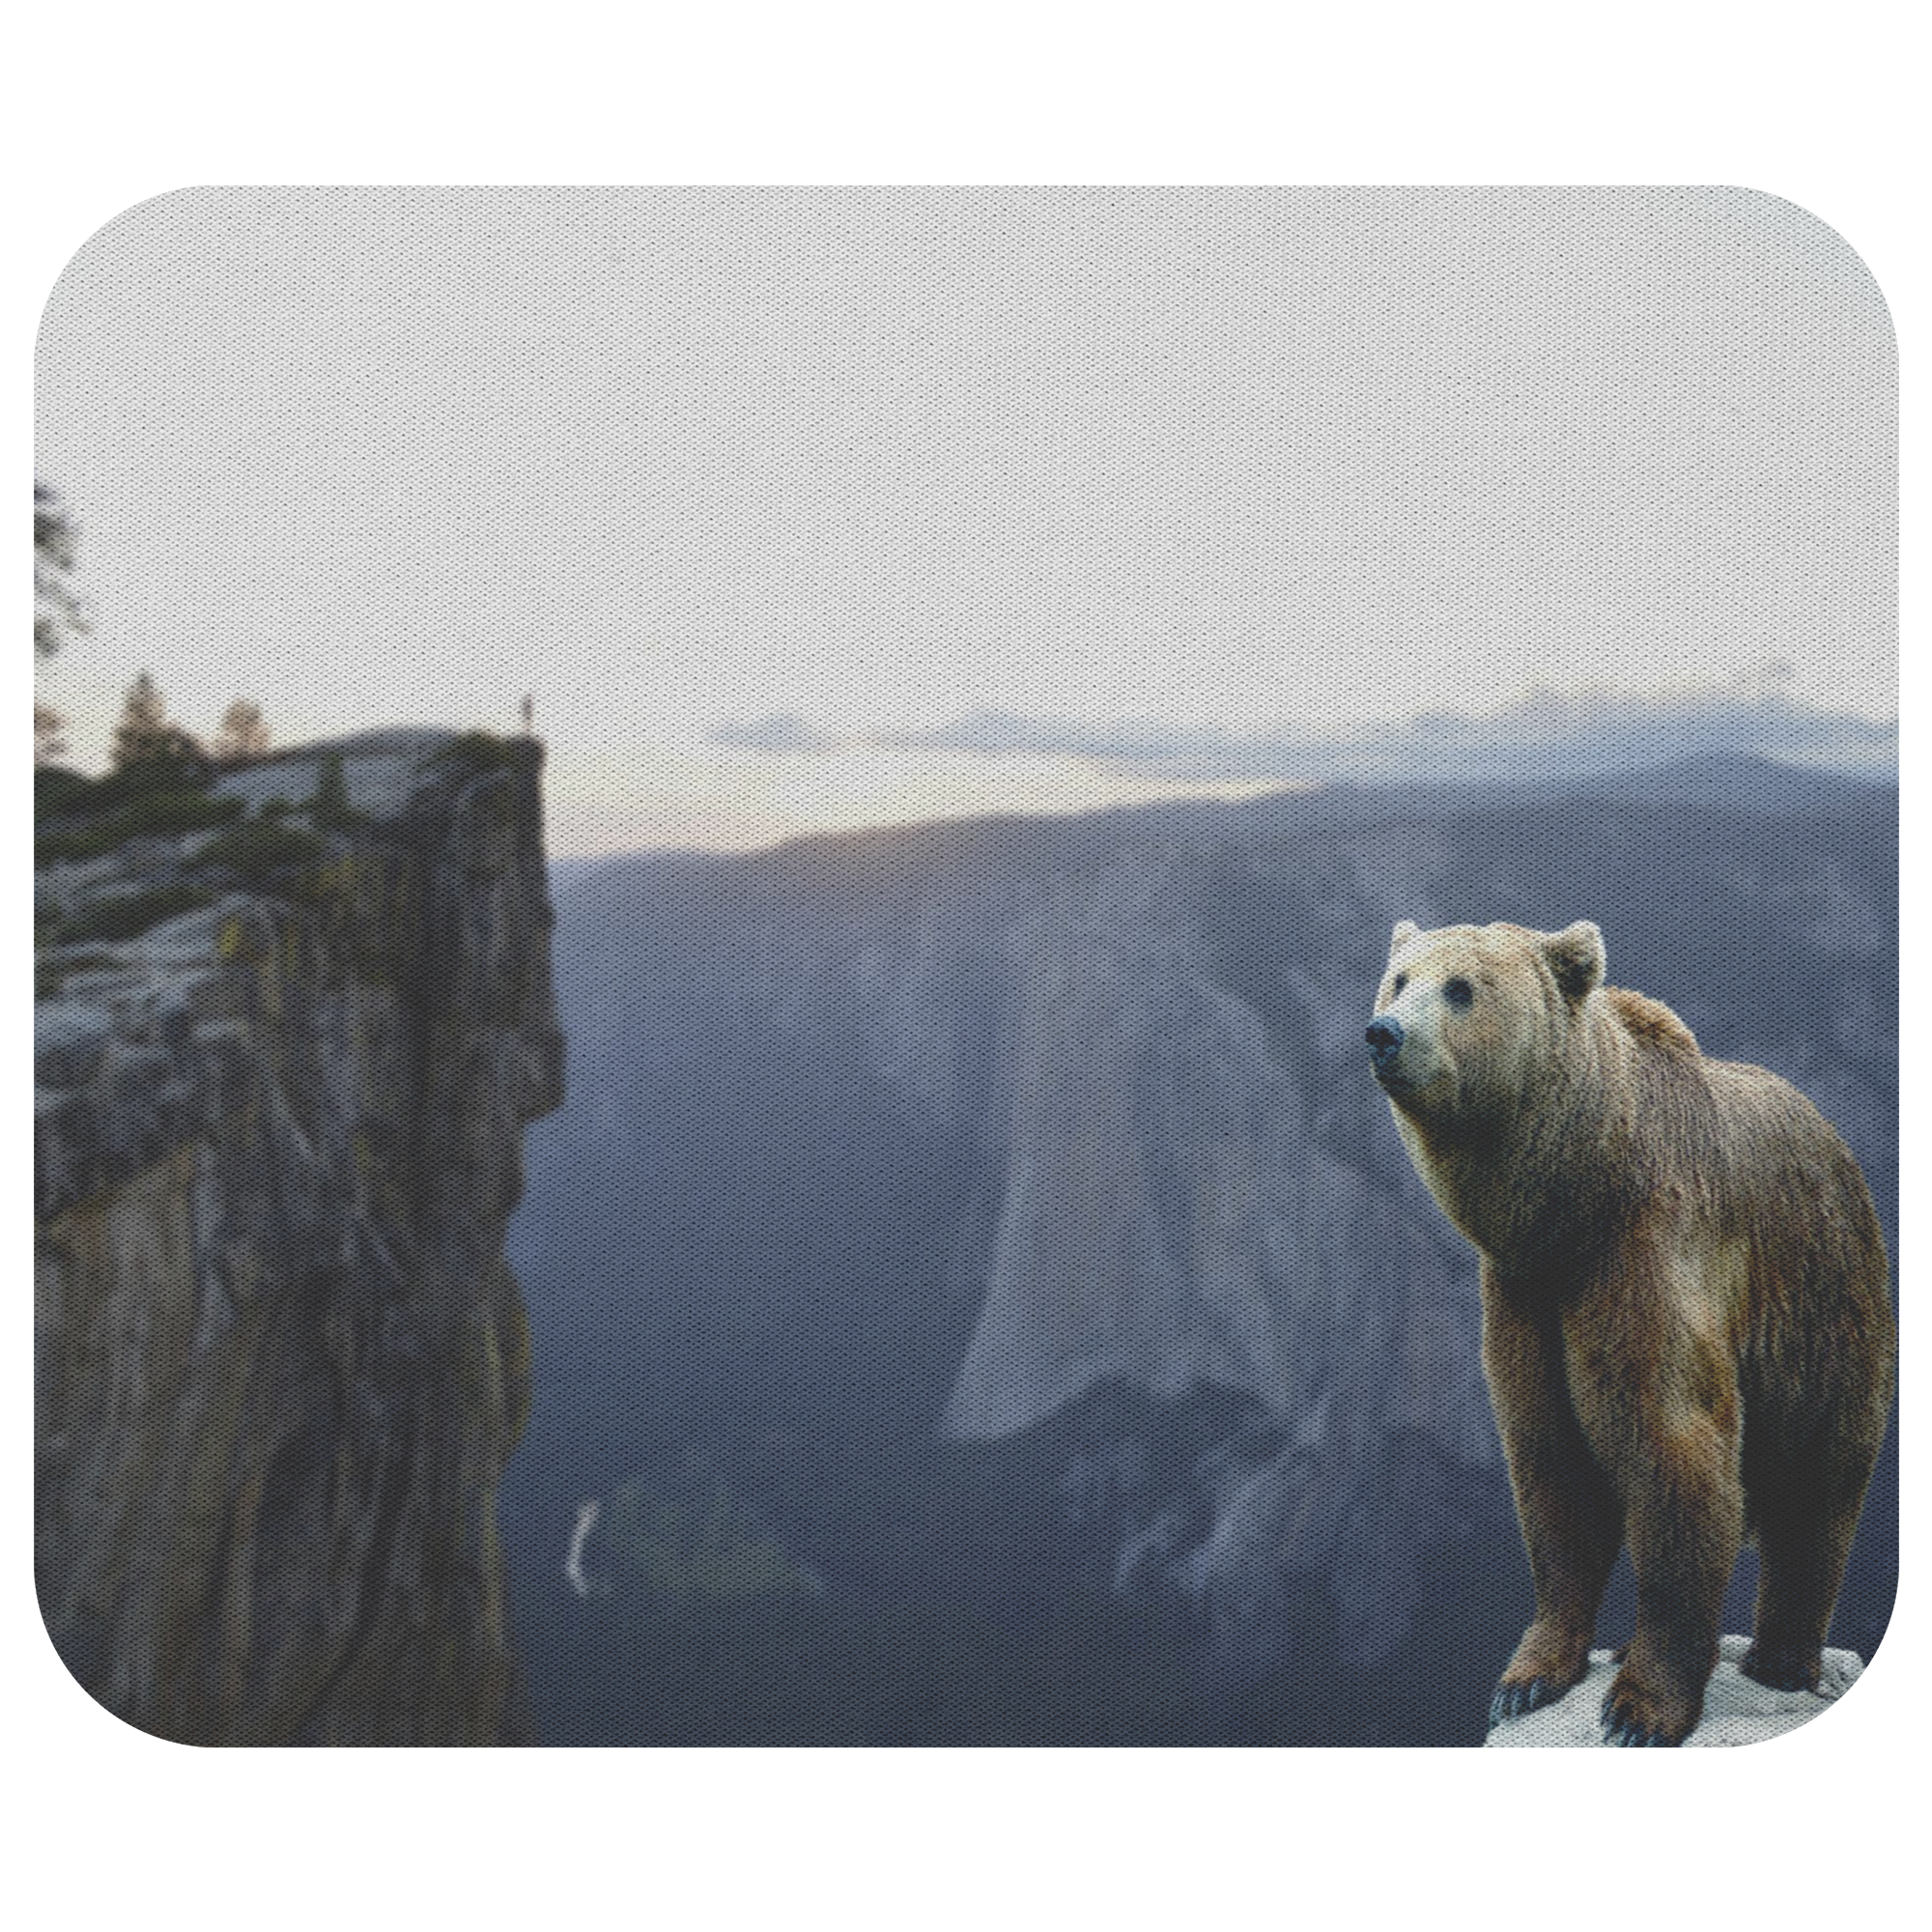 Grizzly Bear on The Mountain Mouse Pad - Wildlife Animal Nature Mouse Mat - Personalized Home Office Decor - Desk Accessories - Mousepads Computer Accessory